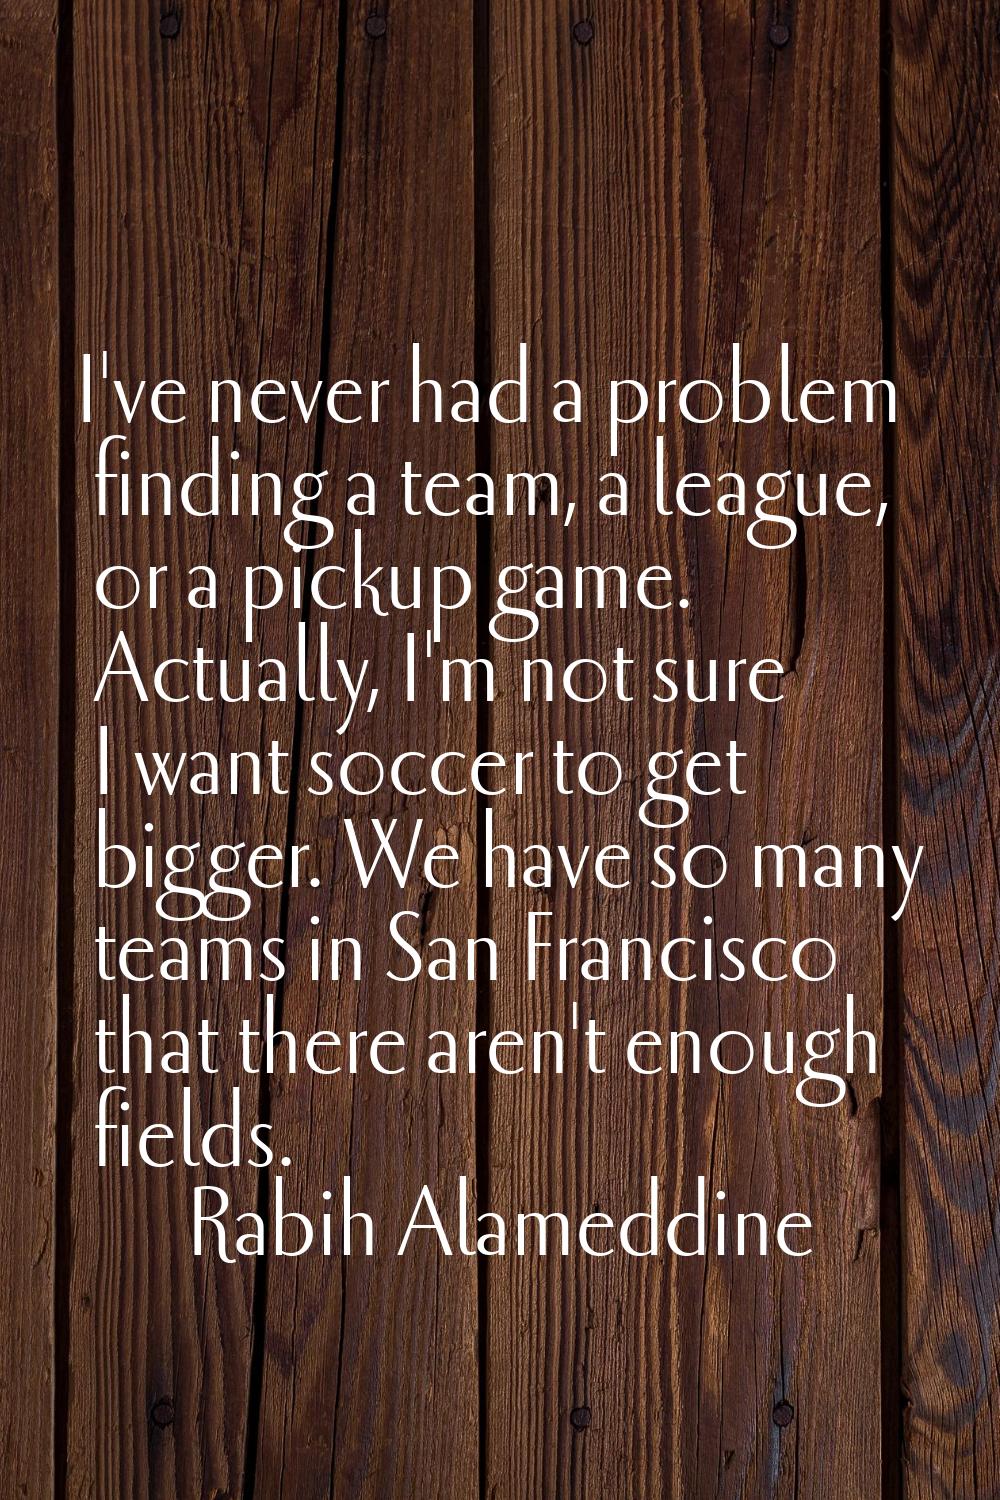 I've never had a problem finding a team, a league, or a pickup game. Actually, I'm not sure I want 